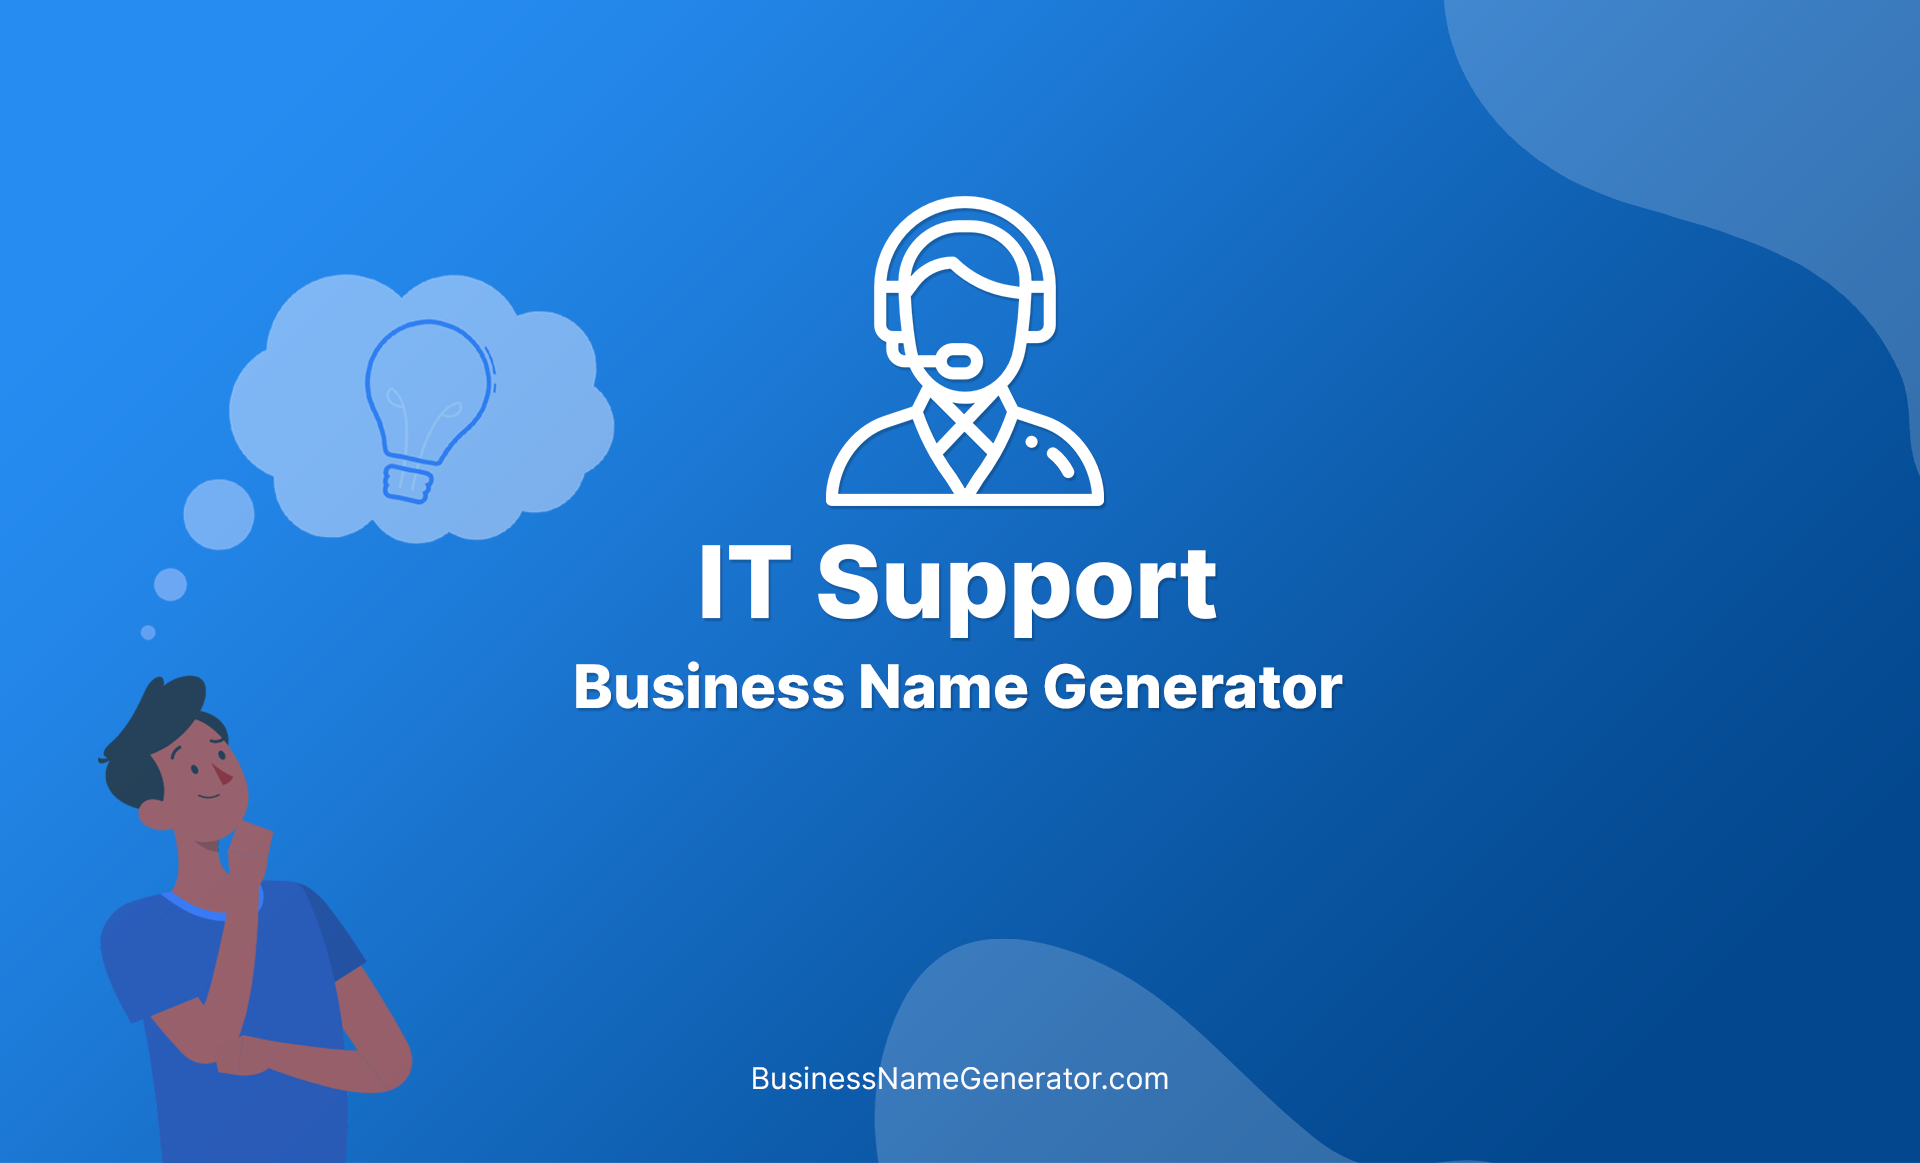 IT Support Business Name Generator